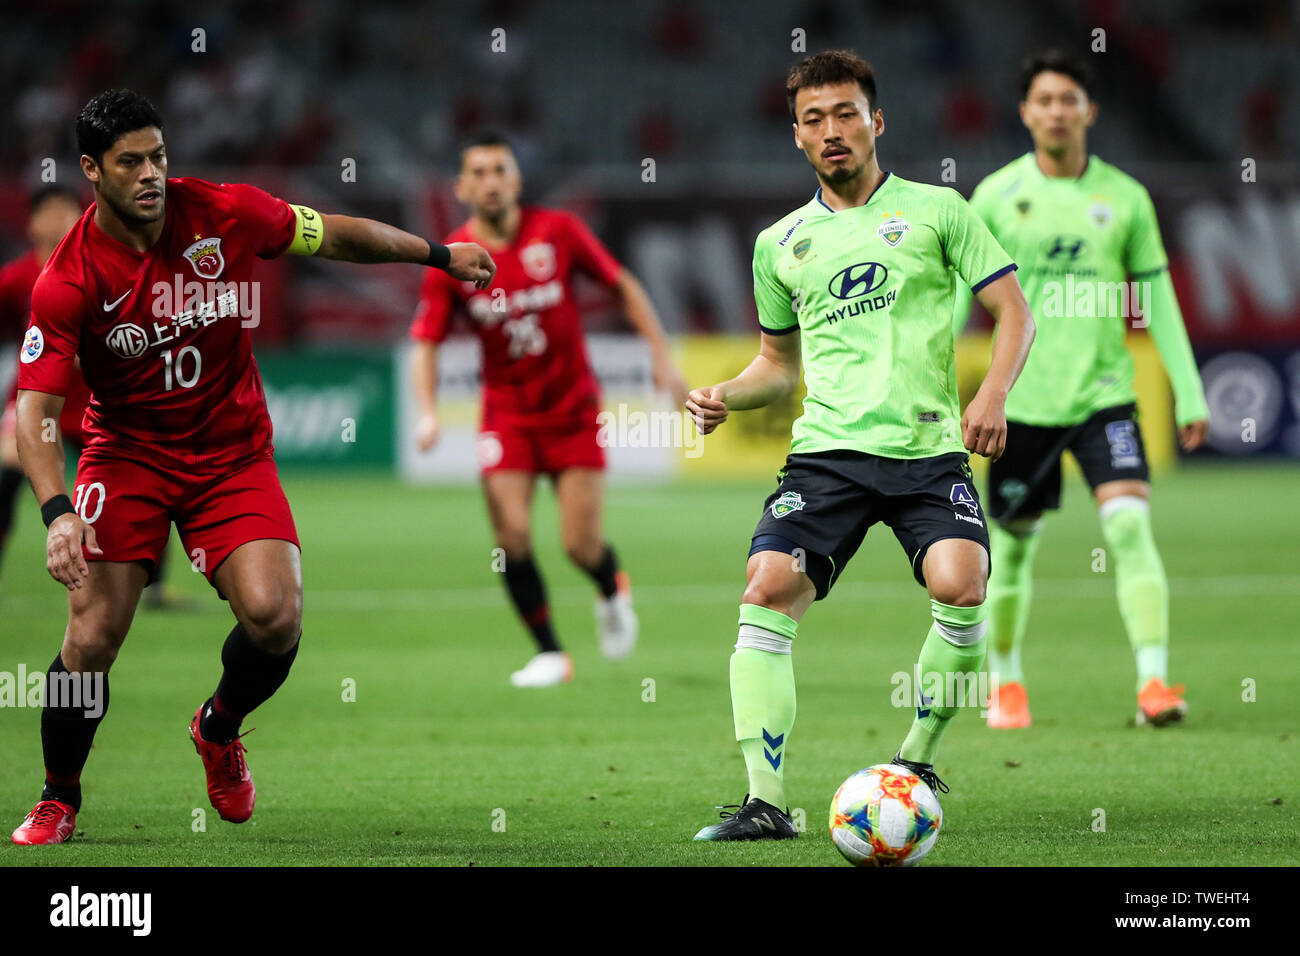 Brazilian football player Givanildo Vieira de Sousa, known as Hulk, left, of China's Shanghai SIPG F.C. passes the ball against Shin Hyung-min of South Korea's Jeonbuk Hyundai Motors FC in the eighth-final match during the 2019 AFC Champions League in Shanghai, China, 19 June 2019. Two-time champions Jeonbuk Hyundai Motors will take an advantage into the second leg of their 2019 AFC Champions League (ACL) Round of 16 game with Shanghai SIPG FC next week after netting an away goal in their 1-1 draw in Shanghai on Wednesday. Stock Photo